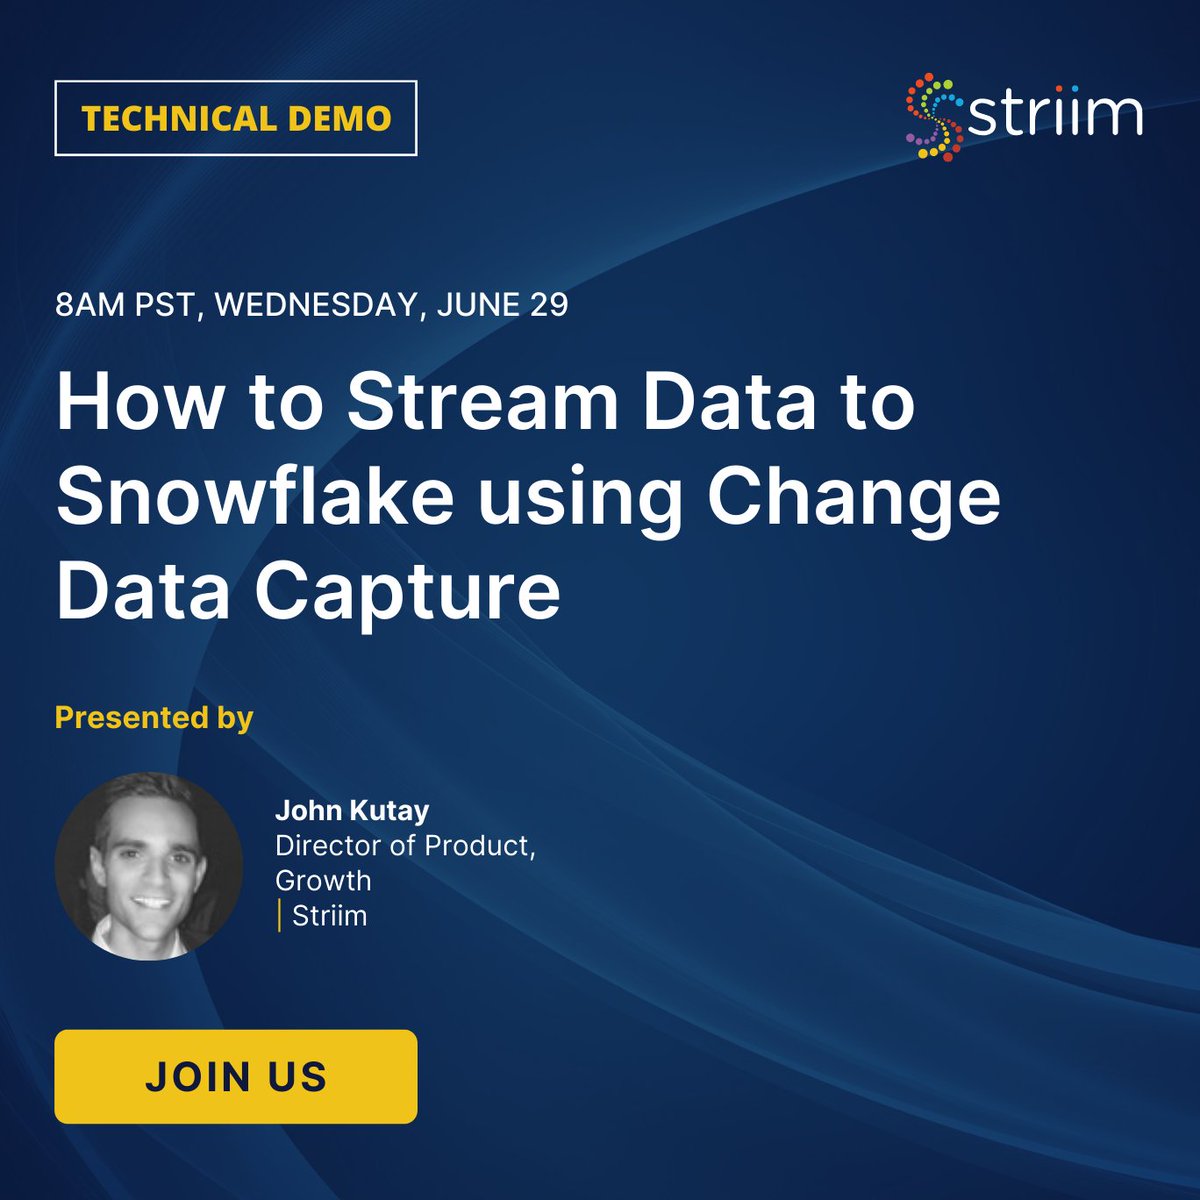 Ah! Giving this live demo on Wednesday. I carved out 30-minutes of my day to prepare this, but I swear that's all you need to stream data to Snowflake with Striim 💯💯💯 https://t.co/p7ZPgjFk37